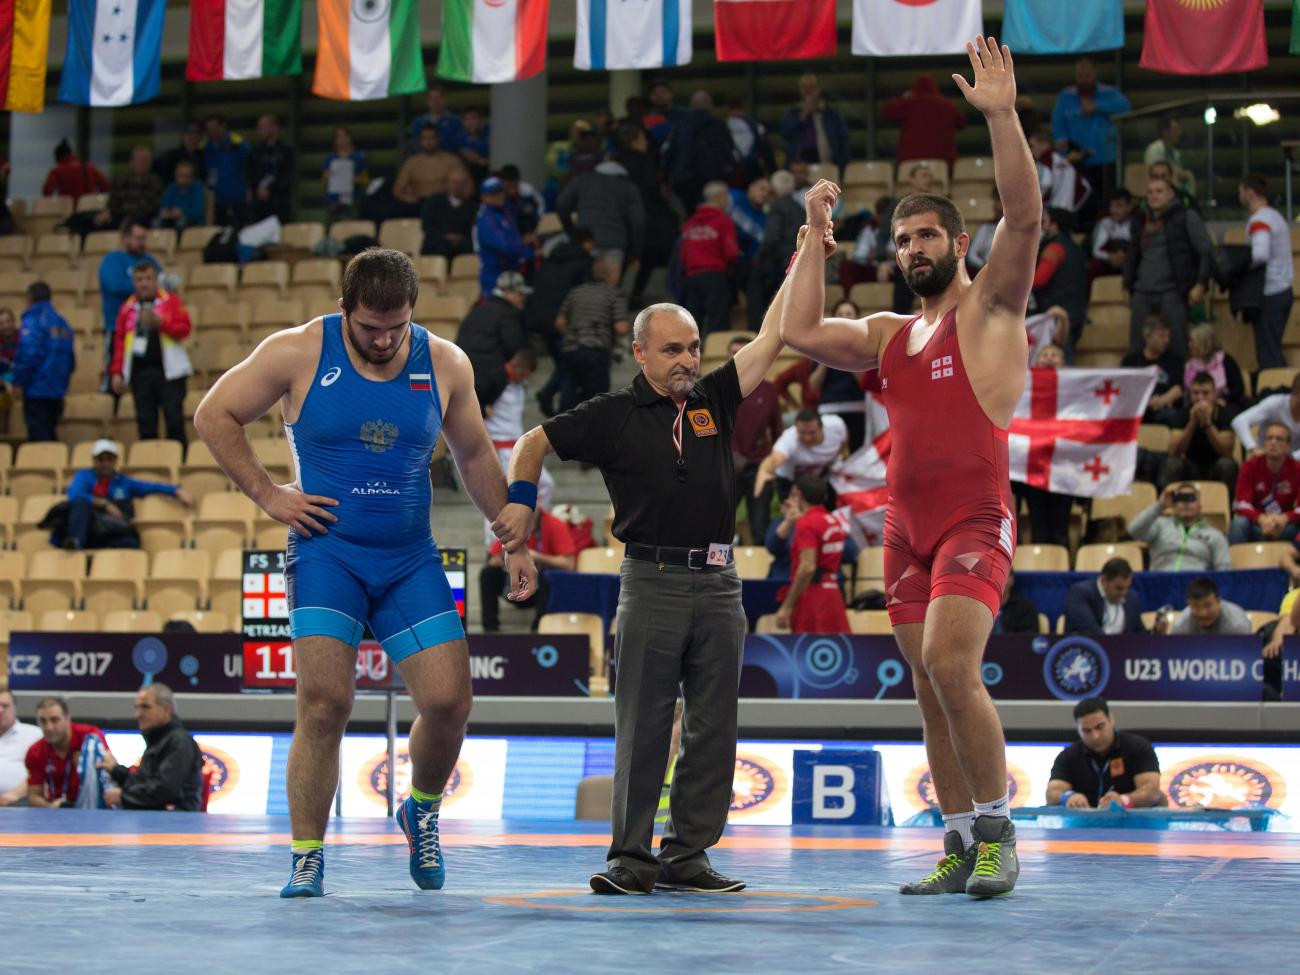 Georgia’s Geno Petriashvili won the men’s 125 kilograms title as the first four freestyle competitions took place today at the Under-23 World Wrestling Championships ©UWW